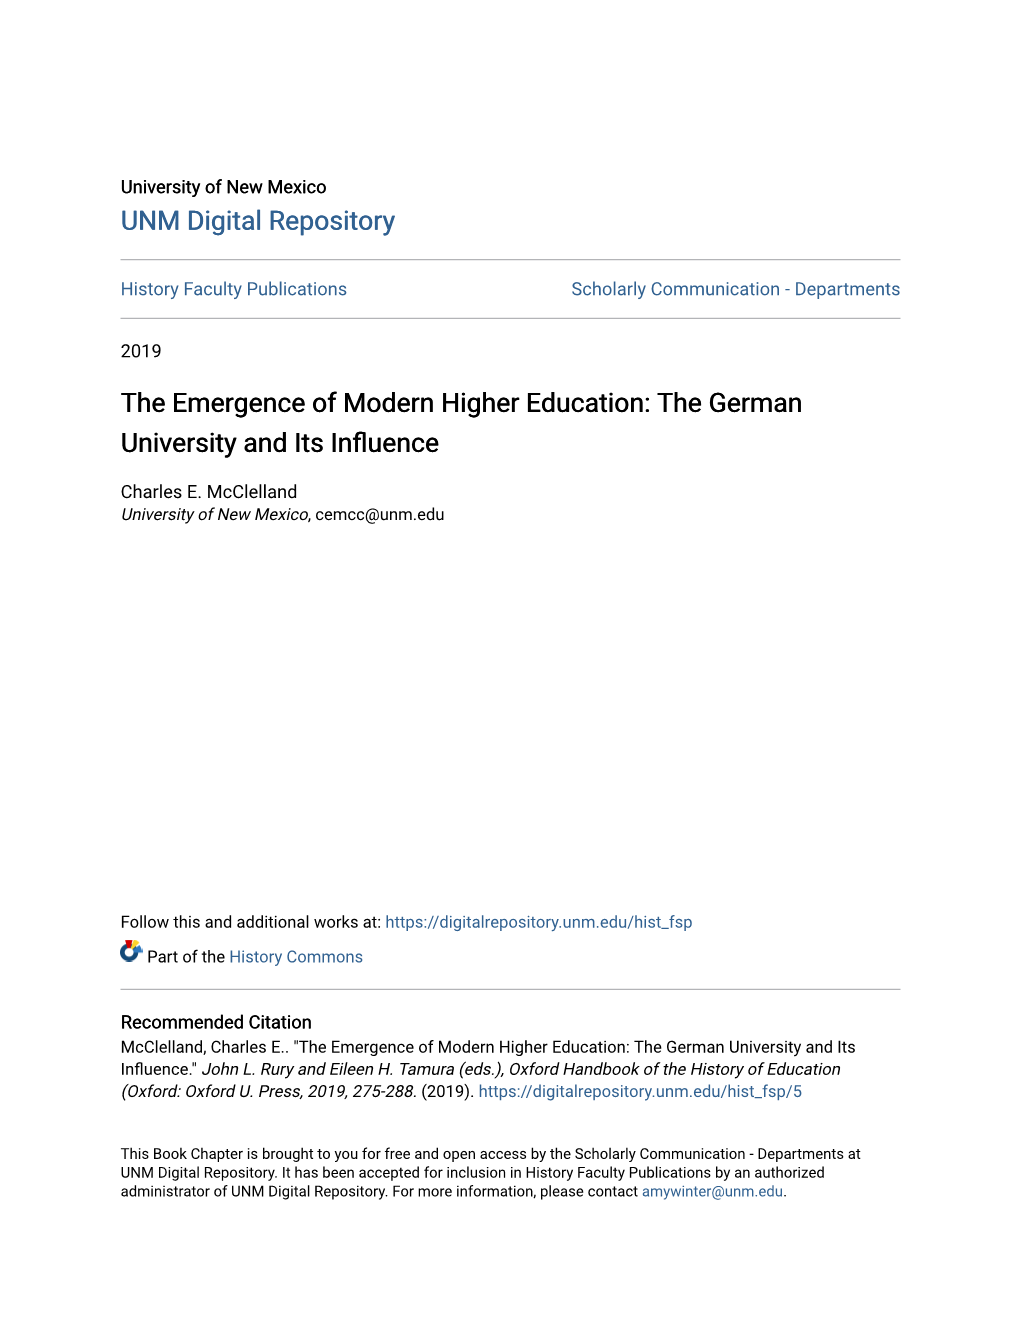 The Emergence of Modern Higher Education: the German University and Its Influence